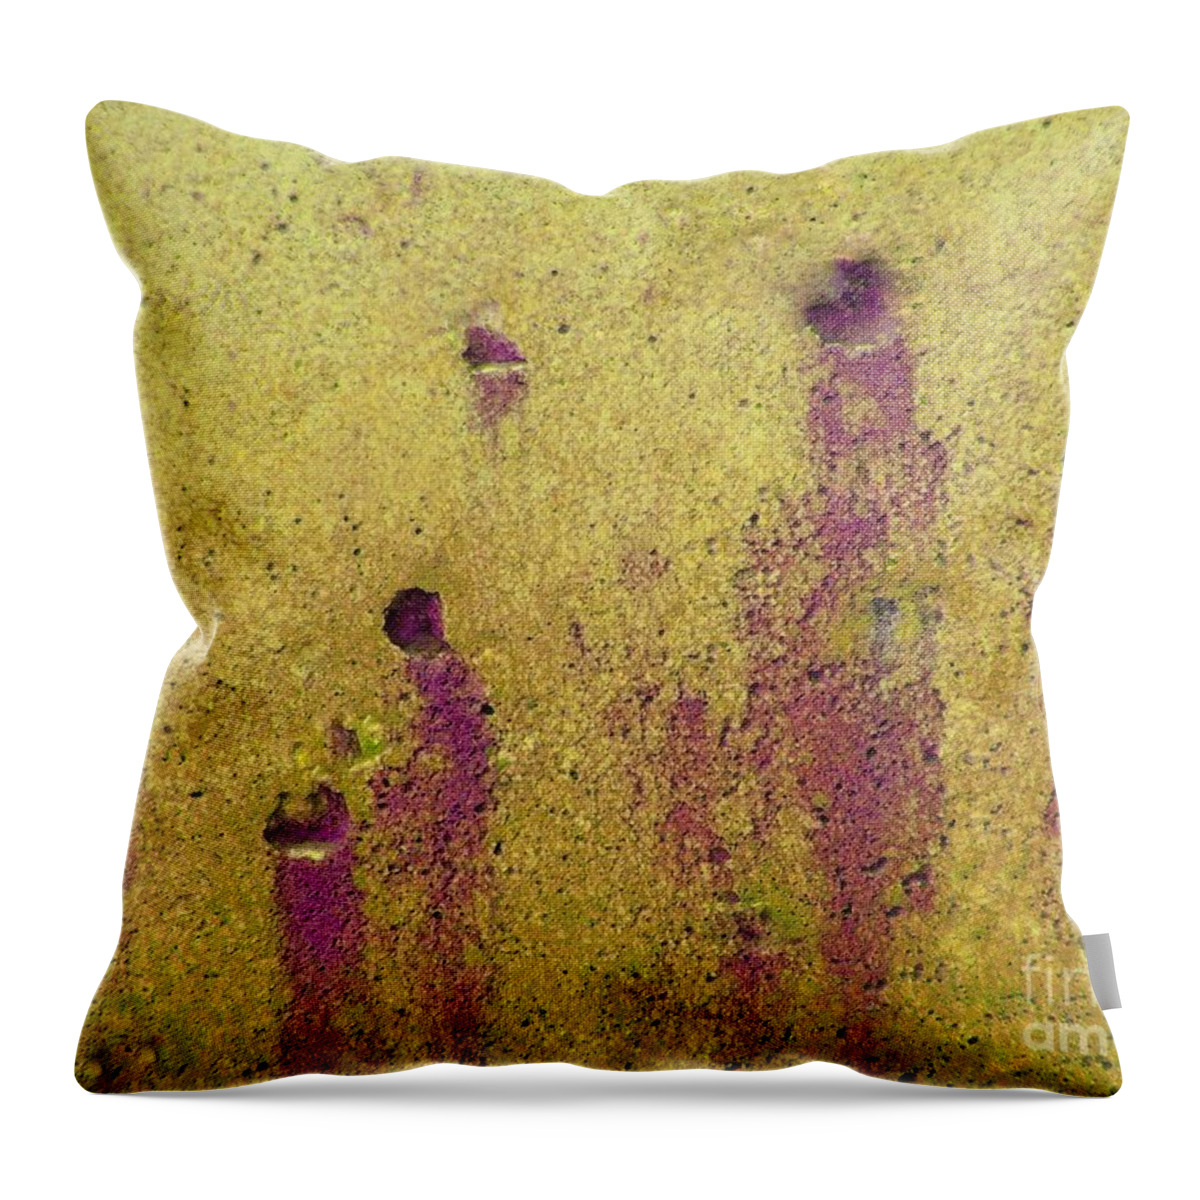 Marcia Lee Jones Throw Pillow featuring the photograph Rising Souls by Marcia Lee Jones